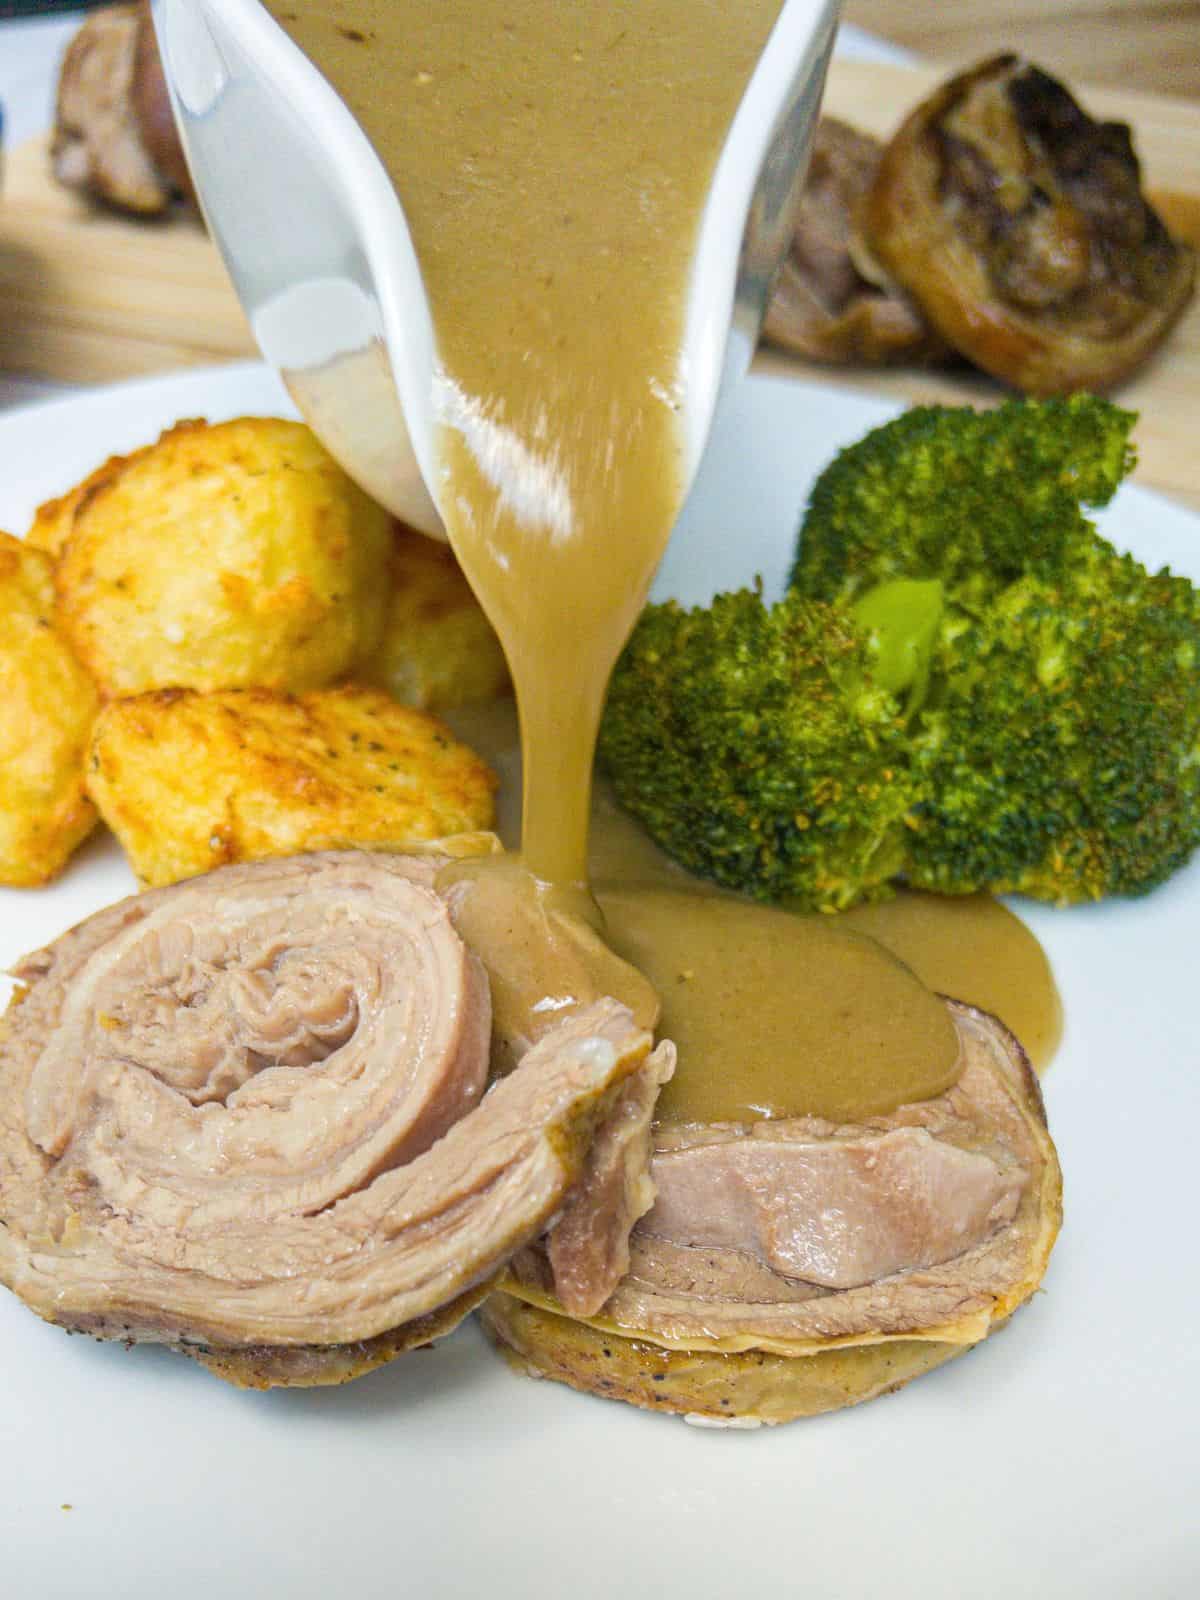 Gravy being poured onto a plate containing lamb breast, roast potatoes and broccoli.